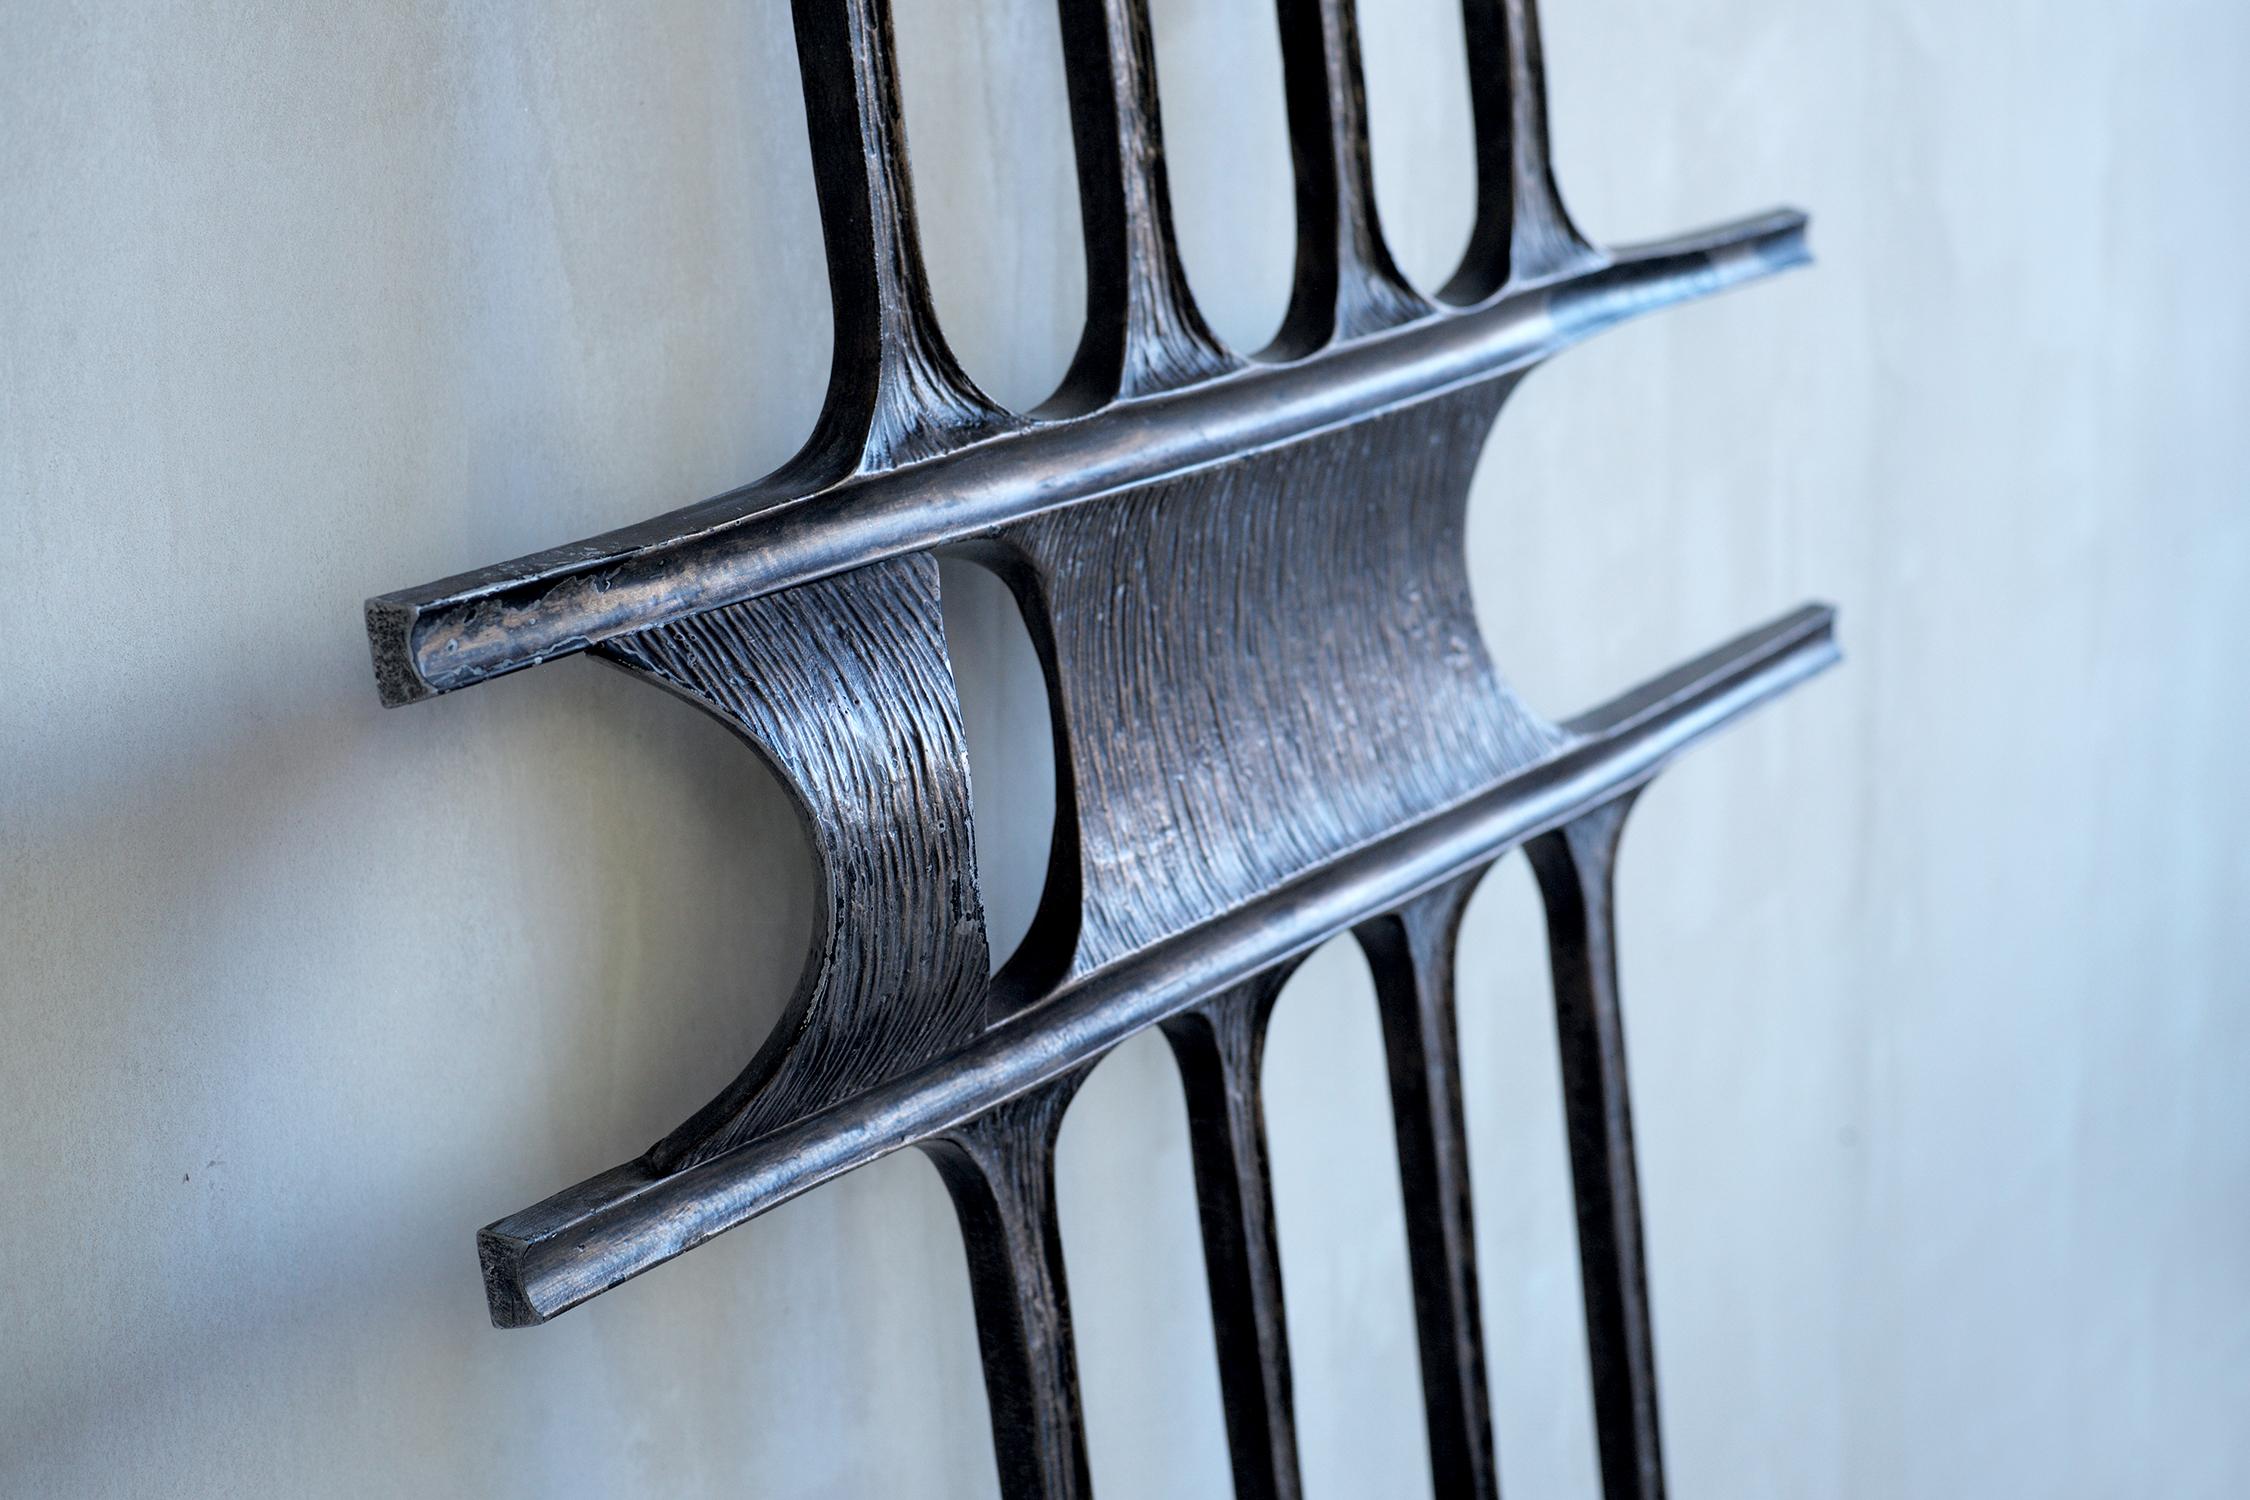 Mid-Century Modern Brutalist Aluminium Wall-Mounted Sculpture, 1960s In Good Condition For Sale In Catonvielle, FR